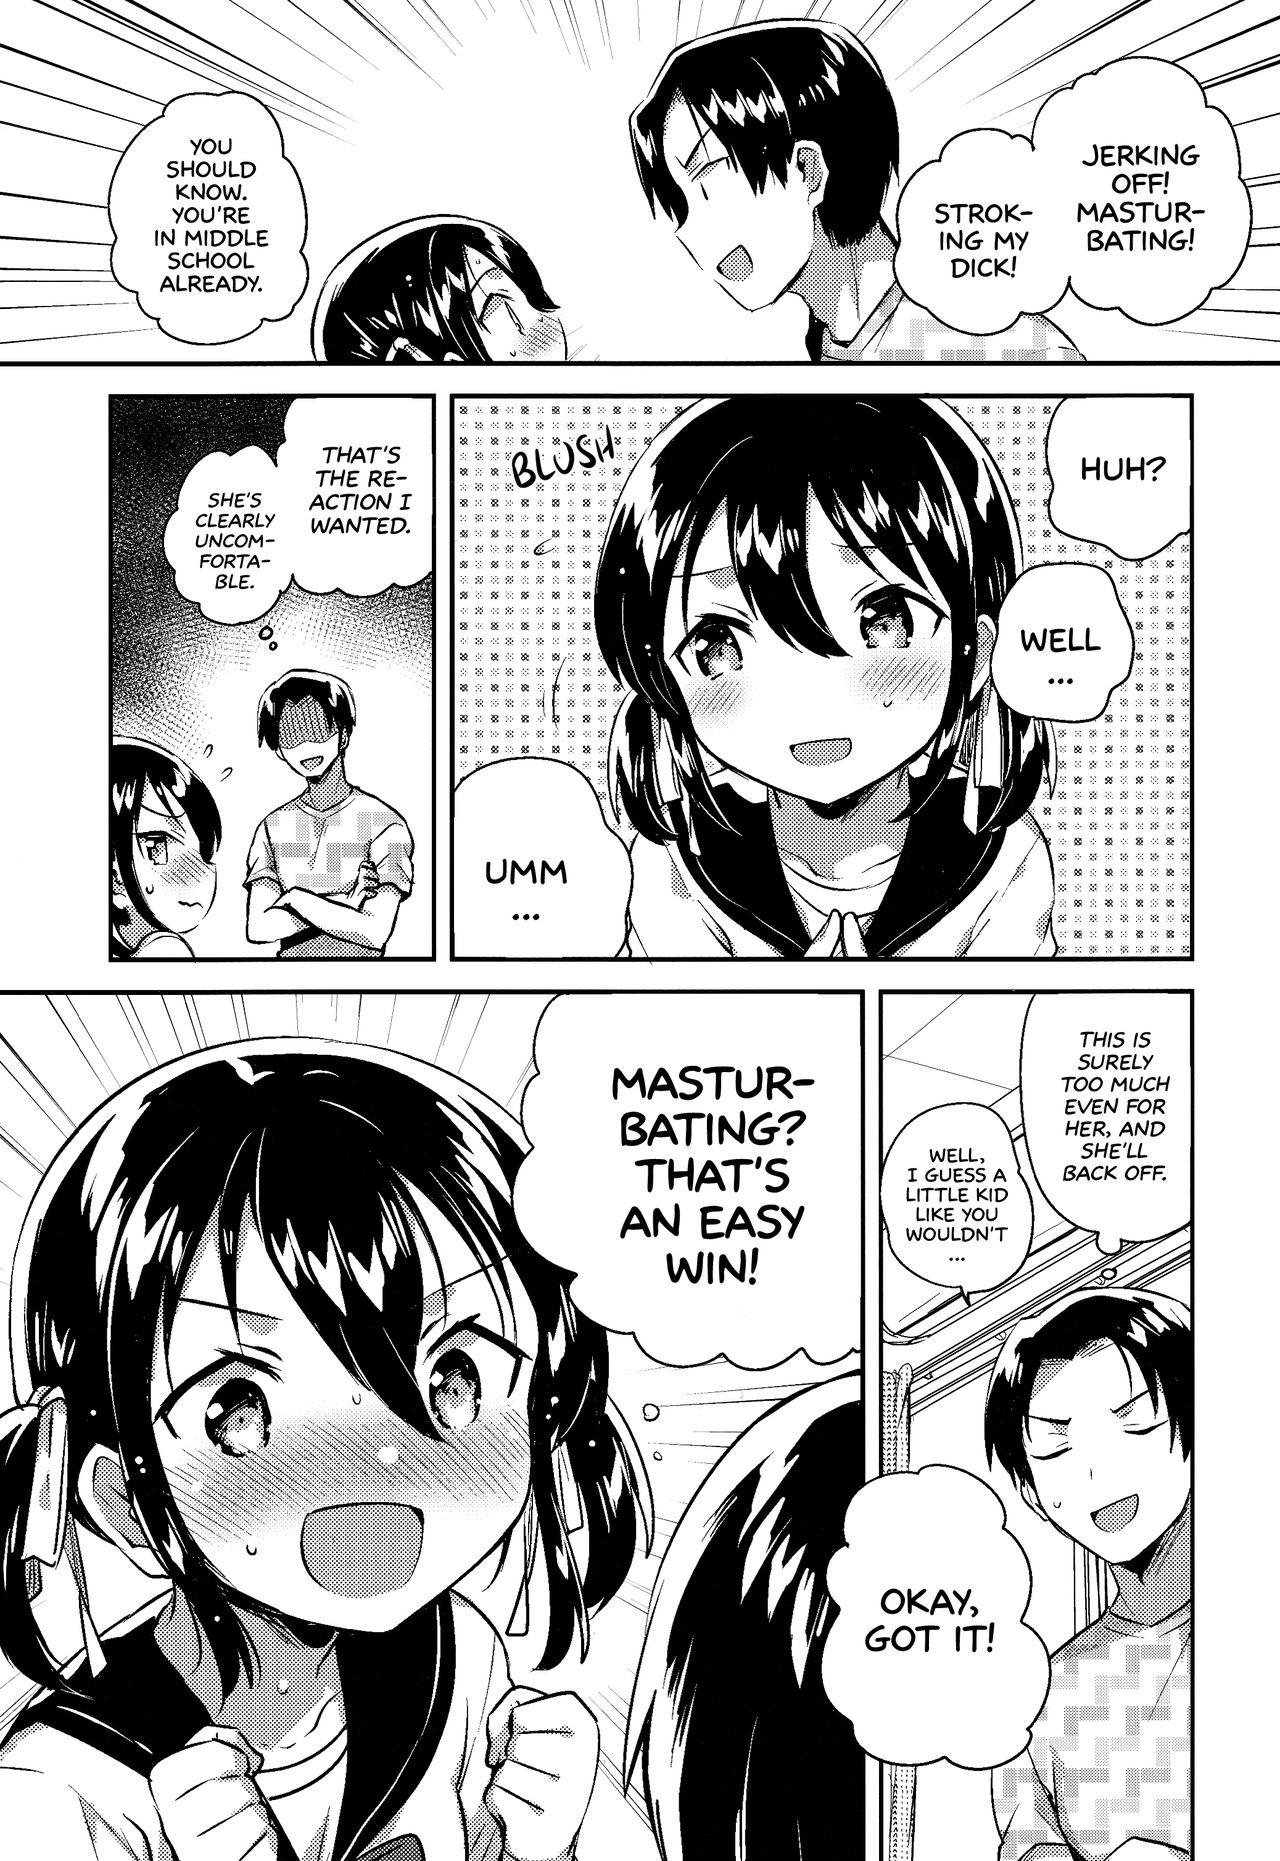 Role Play Imouto wa Genius + Omake | My Little Sister Is a Genius + Bonus Story - Original Class - Page 7